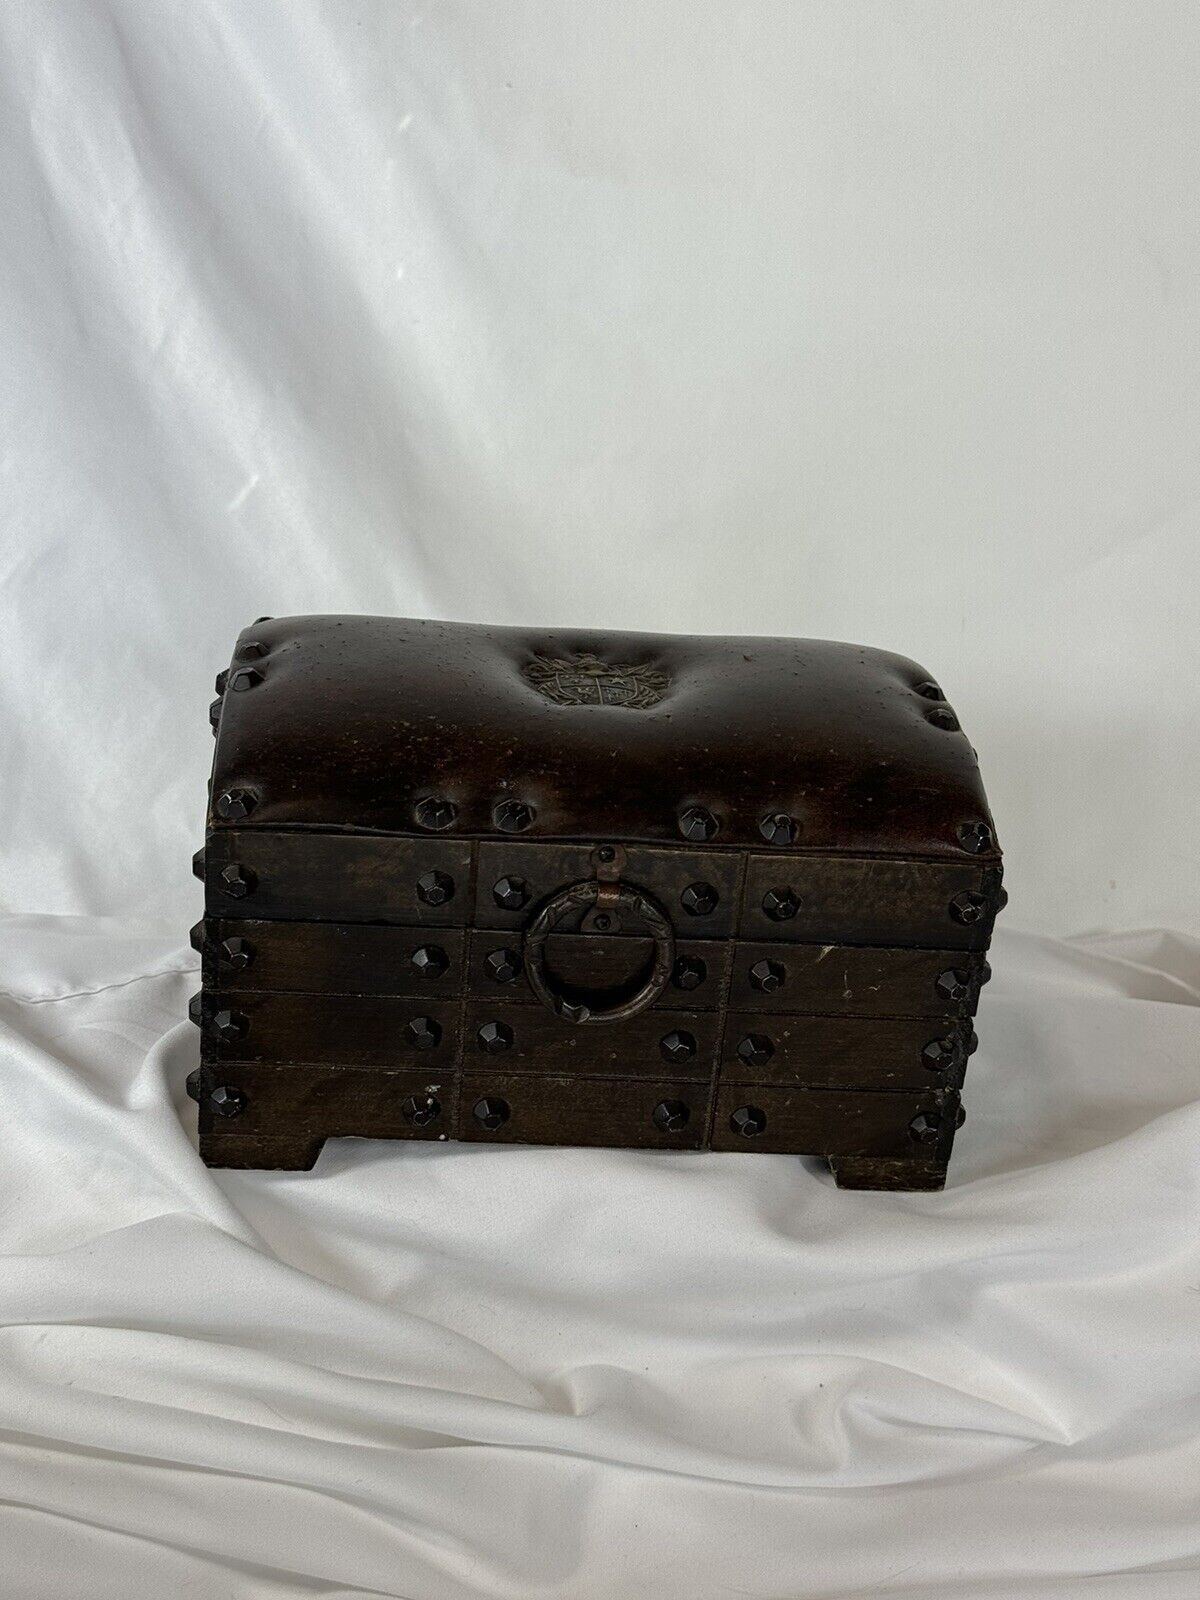 Vintage Small Treasure Chest Jewelery Presentation Box Made In Japan Wood 7”x4”